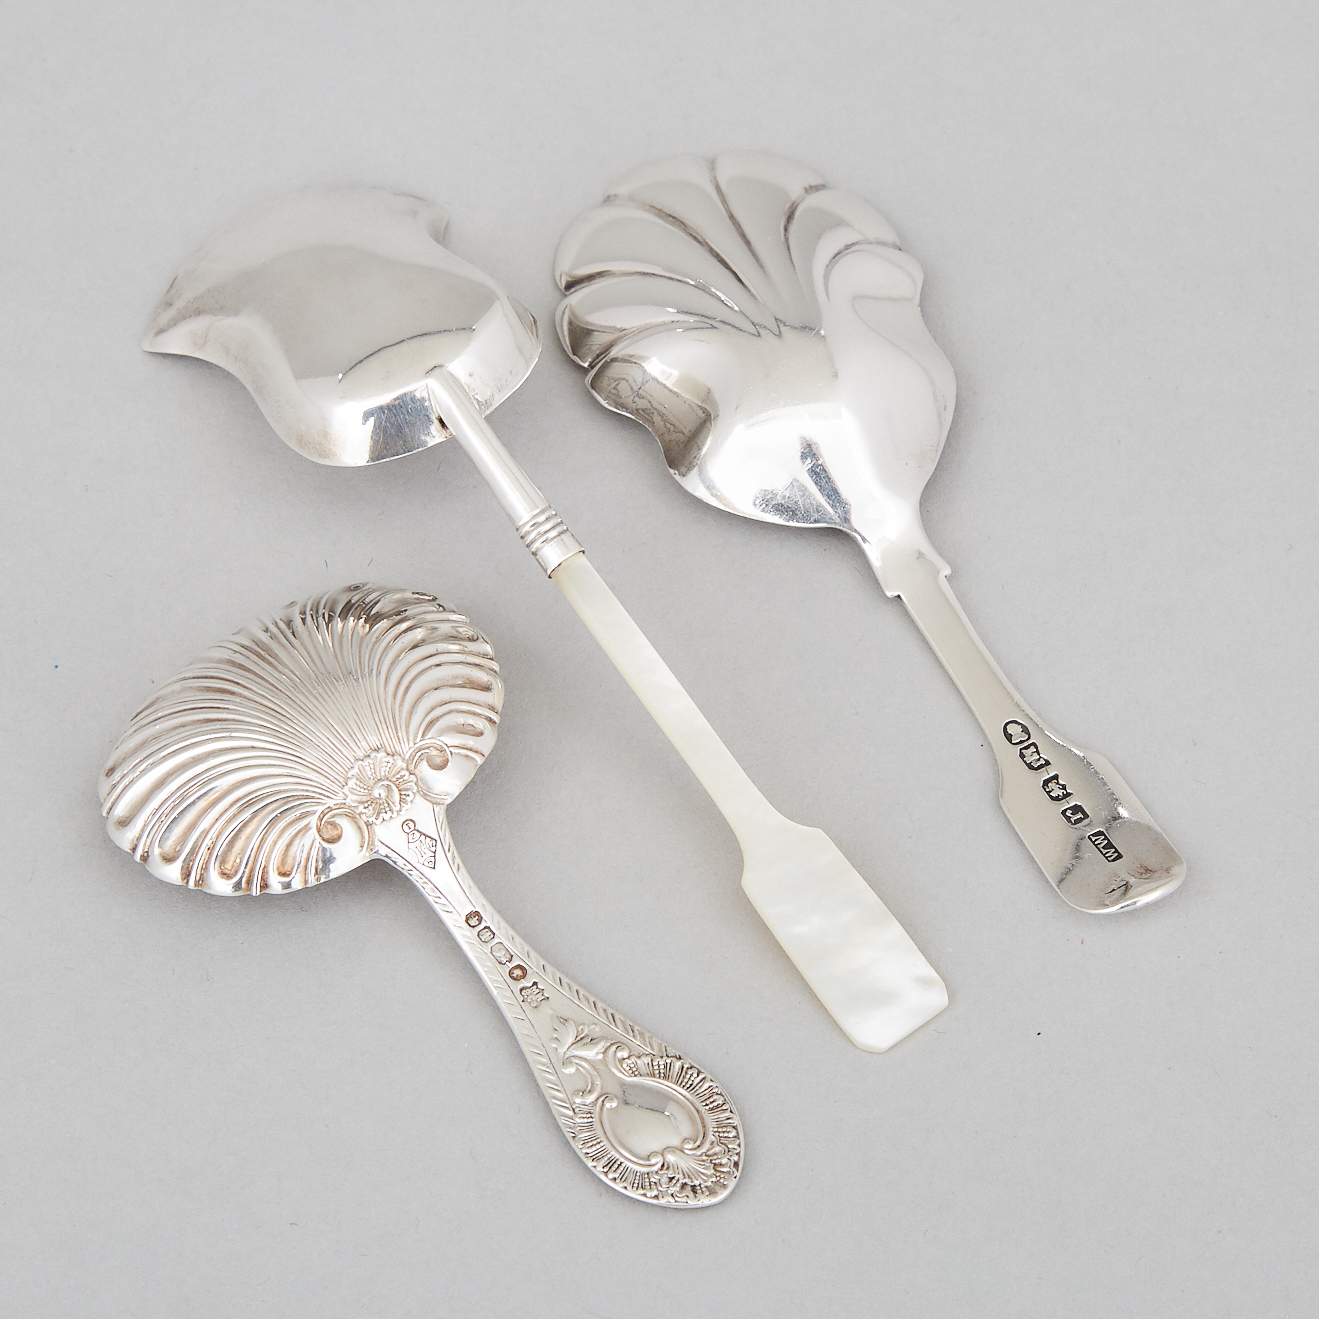 Three Georgian and Victorian Silver Caddy Spoons, Cocks & Bettridge, Birmingham, 1811, William Welch, Exeter, 1833 and Martin Hall & Co., Sheffield, 1861